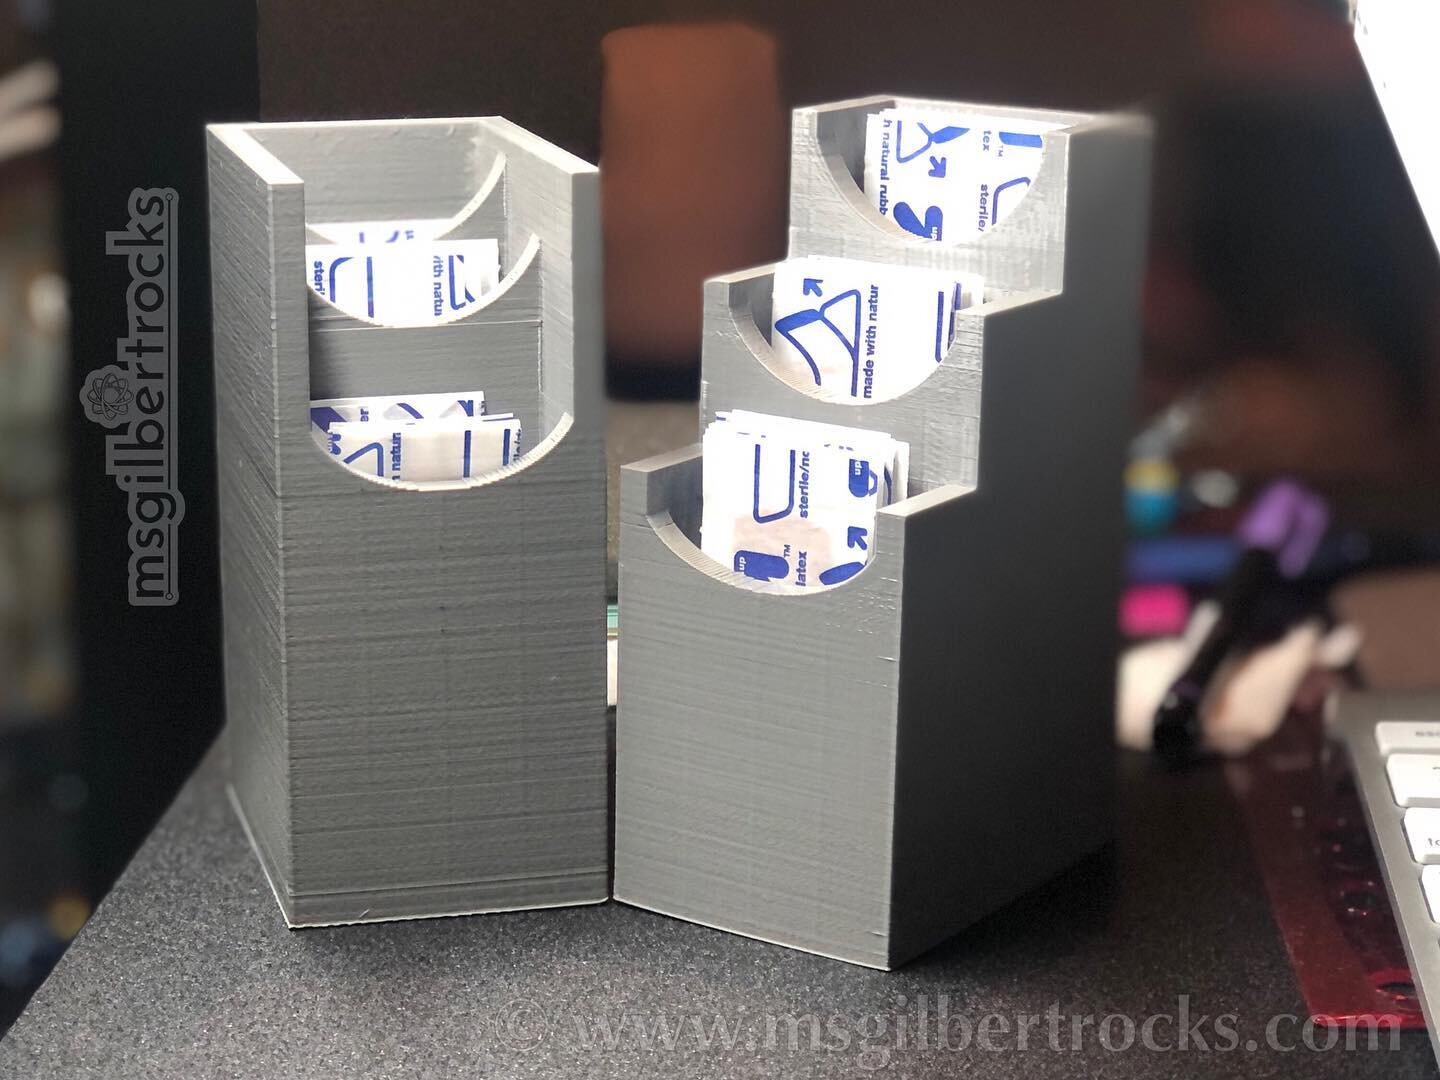 ⁣Another upcoming blog post will be about these&hellip;#3Dprinted organizers for bandages, version 1 (all high sides) and version 2 (varying side heights). I will post on Thingiverse and include that link in the write up. ⁣
⁣
So far prefer the second